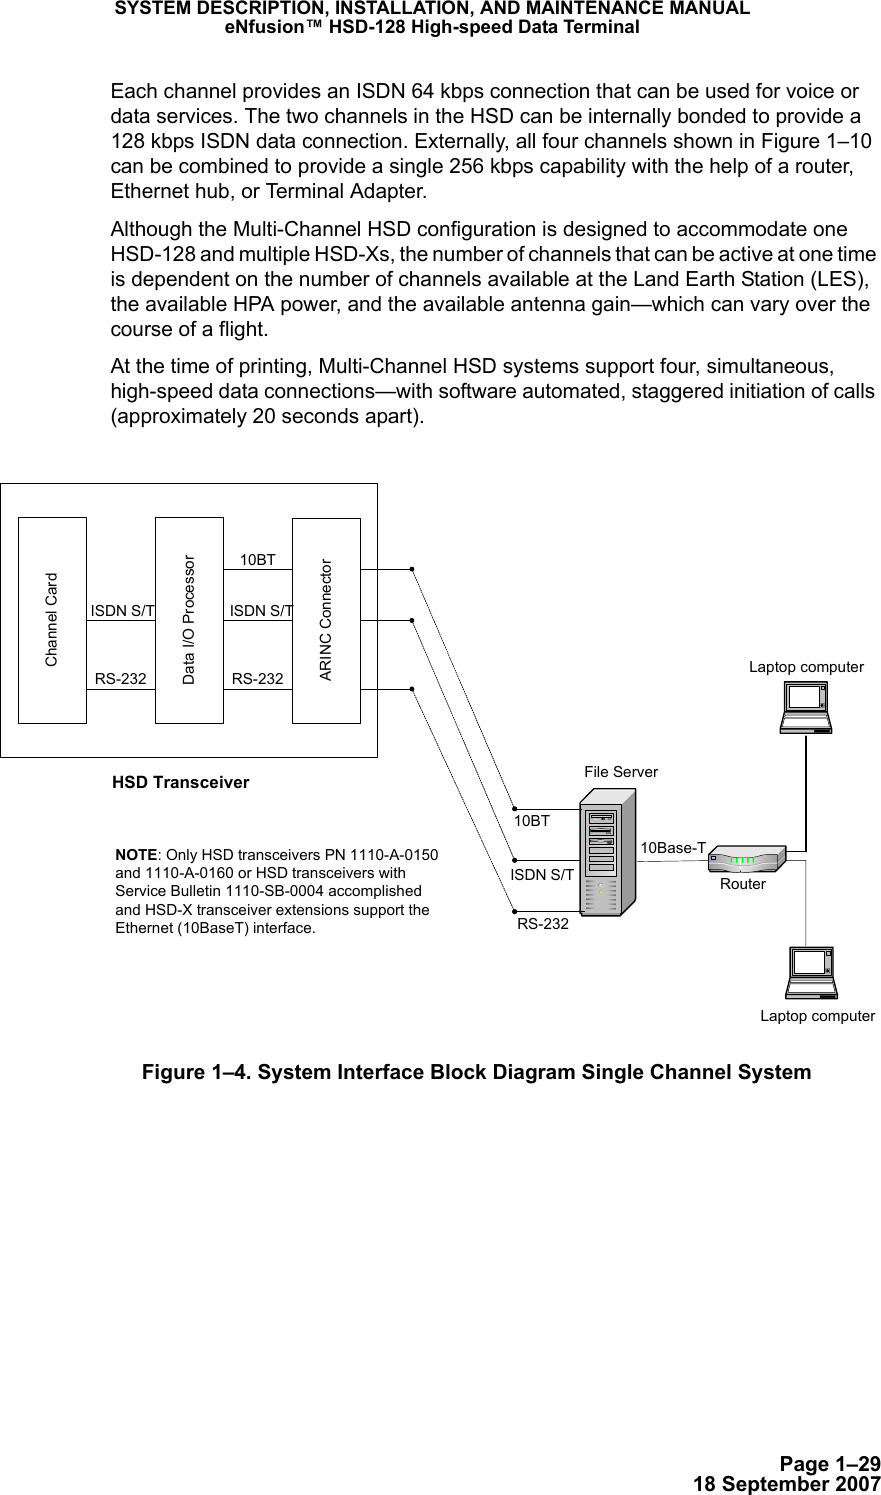 Page 1–2918 September 2007SYSTEM DESCRIPTION, INSTALLATION, AND MAINTENANCE MANUALeNfusion™ HSD-128 High-speed Data TerminalEach channel provides an ISDN 64 kbps connection that can be used for voice or data services. The two channels in the HSD can be internally bonded to provide a 128 kbps ISDN data connection. Externally, all four channels shown in Figure 1–10 can be combined to provide a single 256 kbps capability with the help of a router, Ethernet hub, or Terminal Adapter.Although the Multi-Channel HSD configuration is designed to accommodate one HSD-128 and multiple HSD-Xs, the number of channels that can be active at one time is dependent on the number of channels available at the Land Earth Station (LES), the available HPA power, and the available antenna gain—which can vary over the course of a flight. At the time of printing, Multi-Channel HSD systems support four, simultaneous, high-speed data connections—with software automated, staggered initiation of calls (approximately 20 seconds apart).Figure 1–4. System Interface Block Diagram Single Channel SystemChannel CardData I/O ProcessorARINC ConnectorHSD TransceiverISDN S/T ISDN S/TRS-232 RS-23210BTRS-232File ServerLaptop computerLaptop computerISDN S/T10BT10Base-TRouterNOTE: Only HSD transceivers PN 1110-A-0150and 1110-A-0160 or HSD transceivers withService Bulletin 1110-SB-0004 accomplishedand HSD-X transceiver extensions support theEthernet (10BaseT) interface.